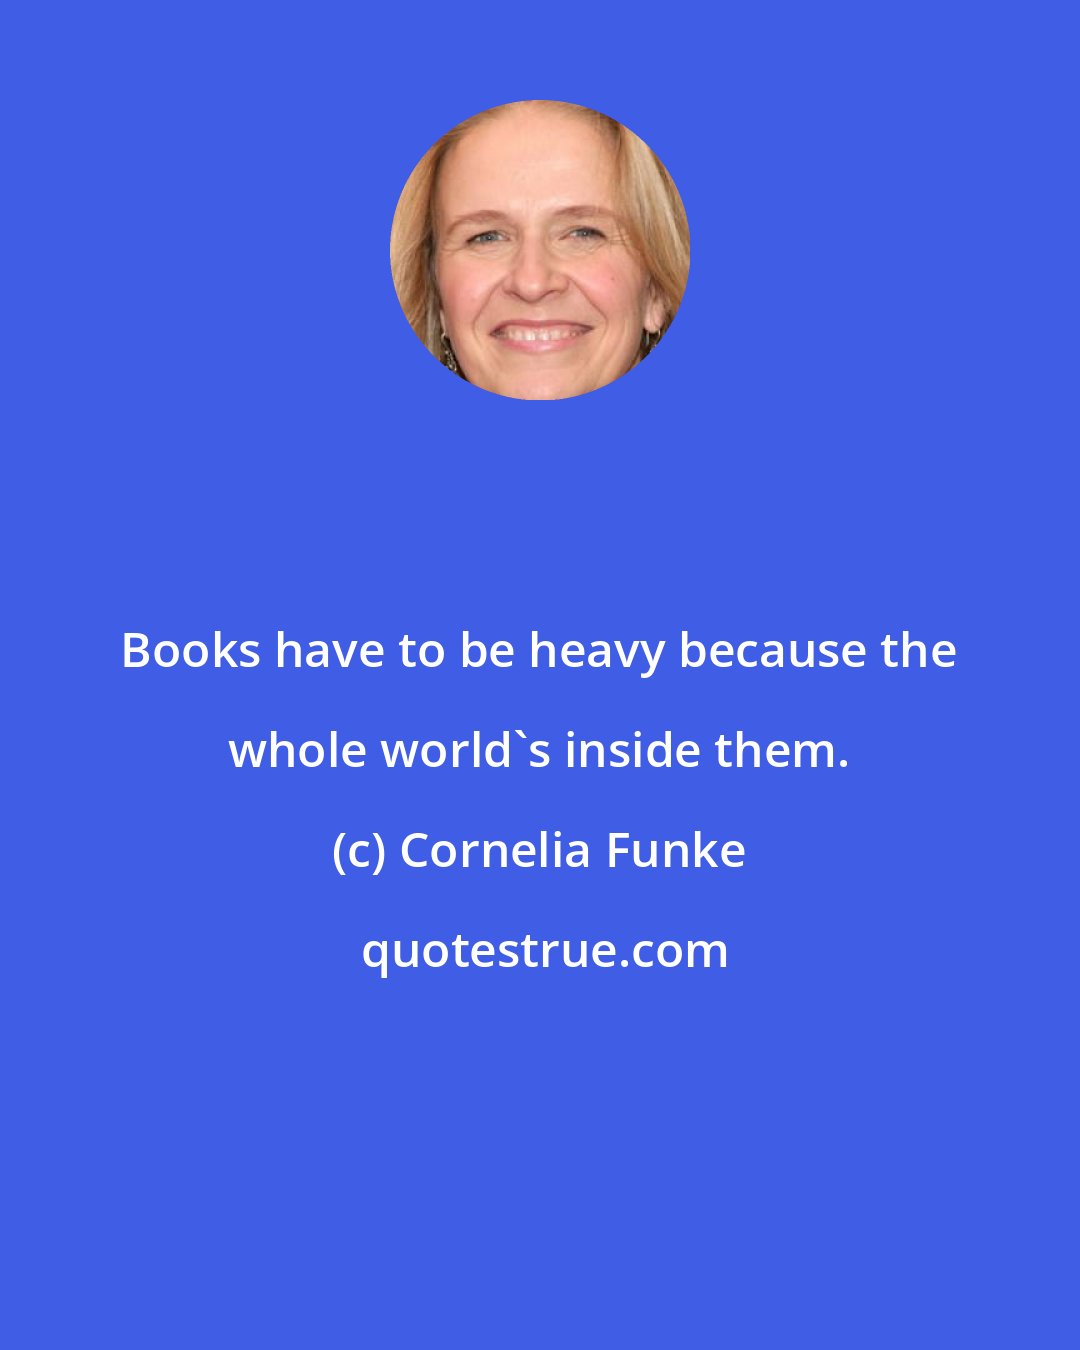 Cornelia Funke: Books have to be heavy because the whole world's inside them.